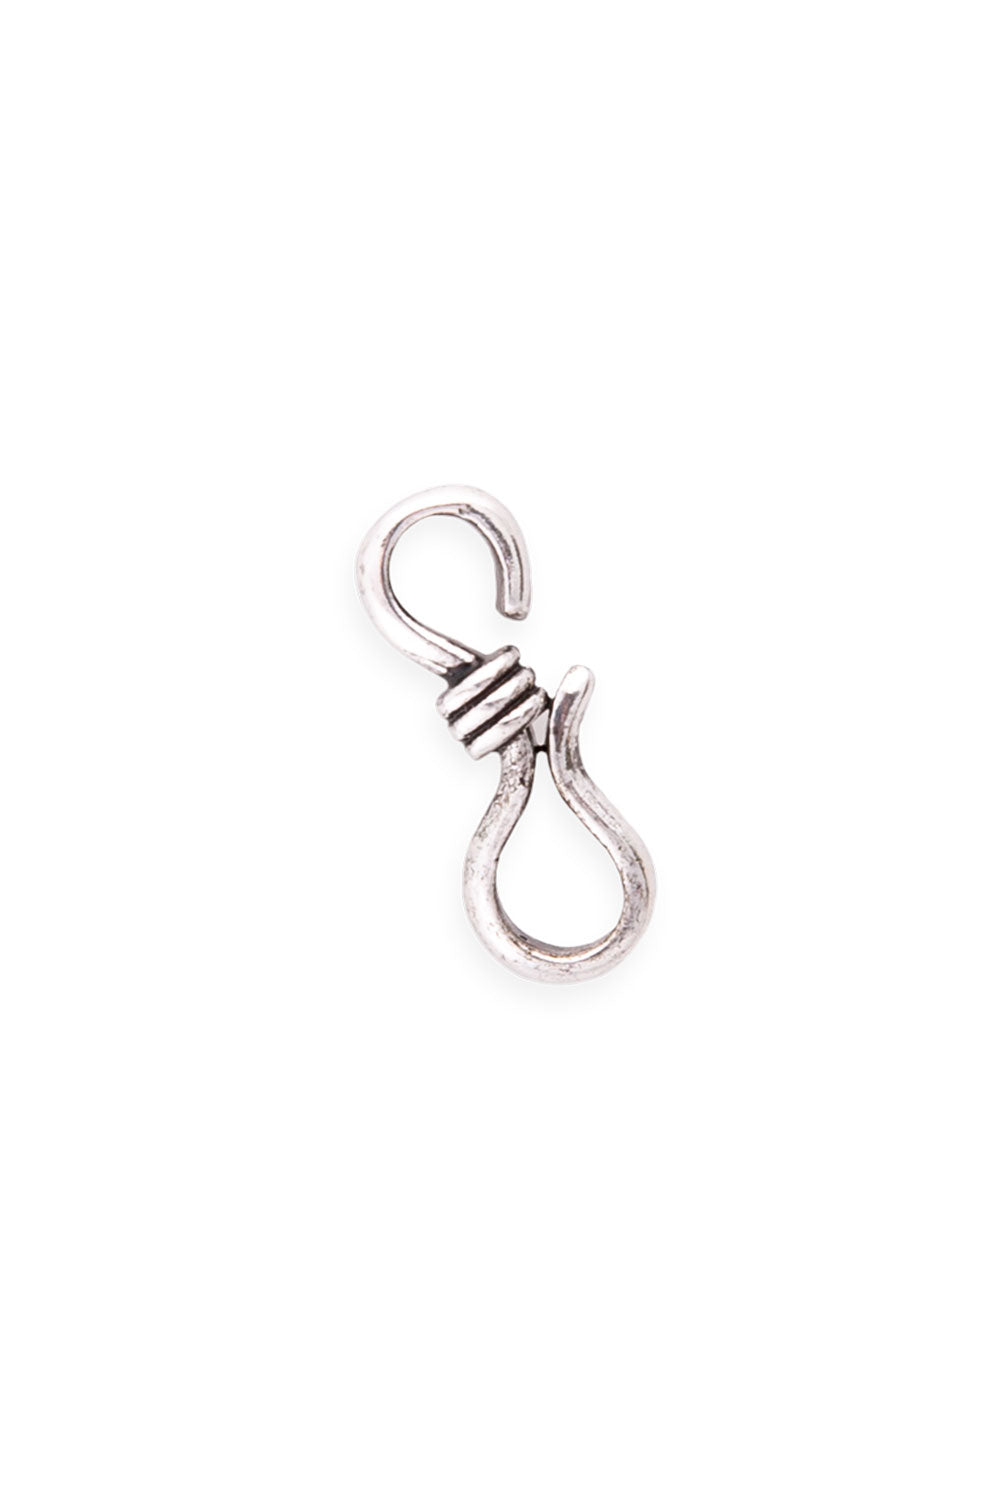 Sterling Silver Clasp - Modern S-hook